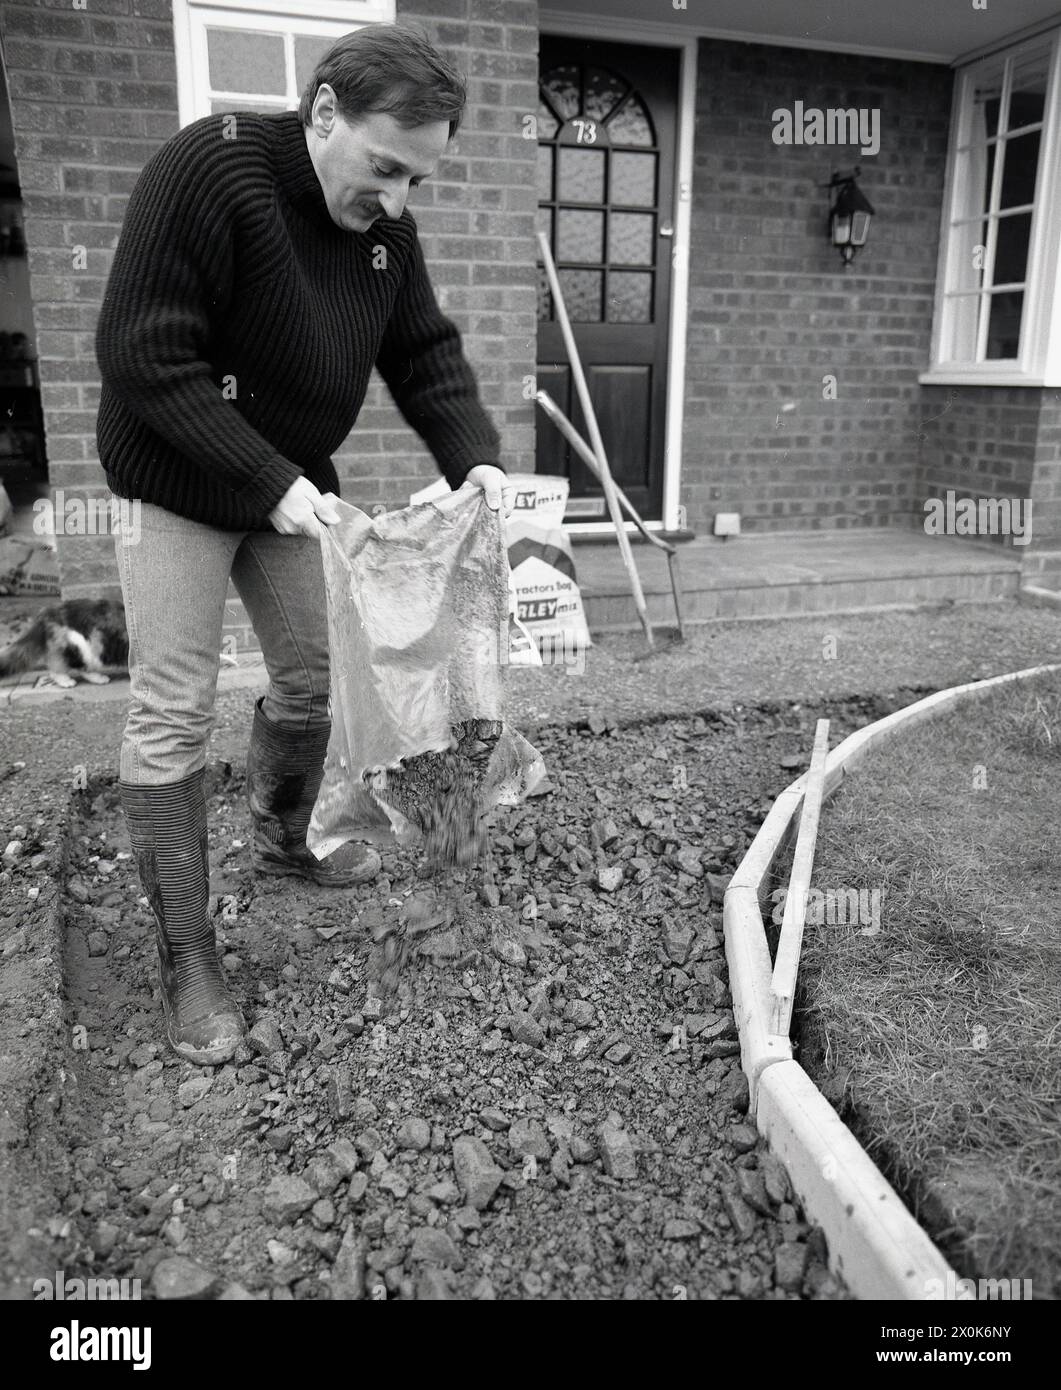 1980s, a man building a new driveway outside a house, putting down hard core rubble as a base. Hardcore is an essential material to lay strong foundations for any building works. Stock Photo